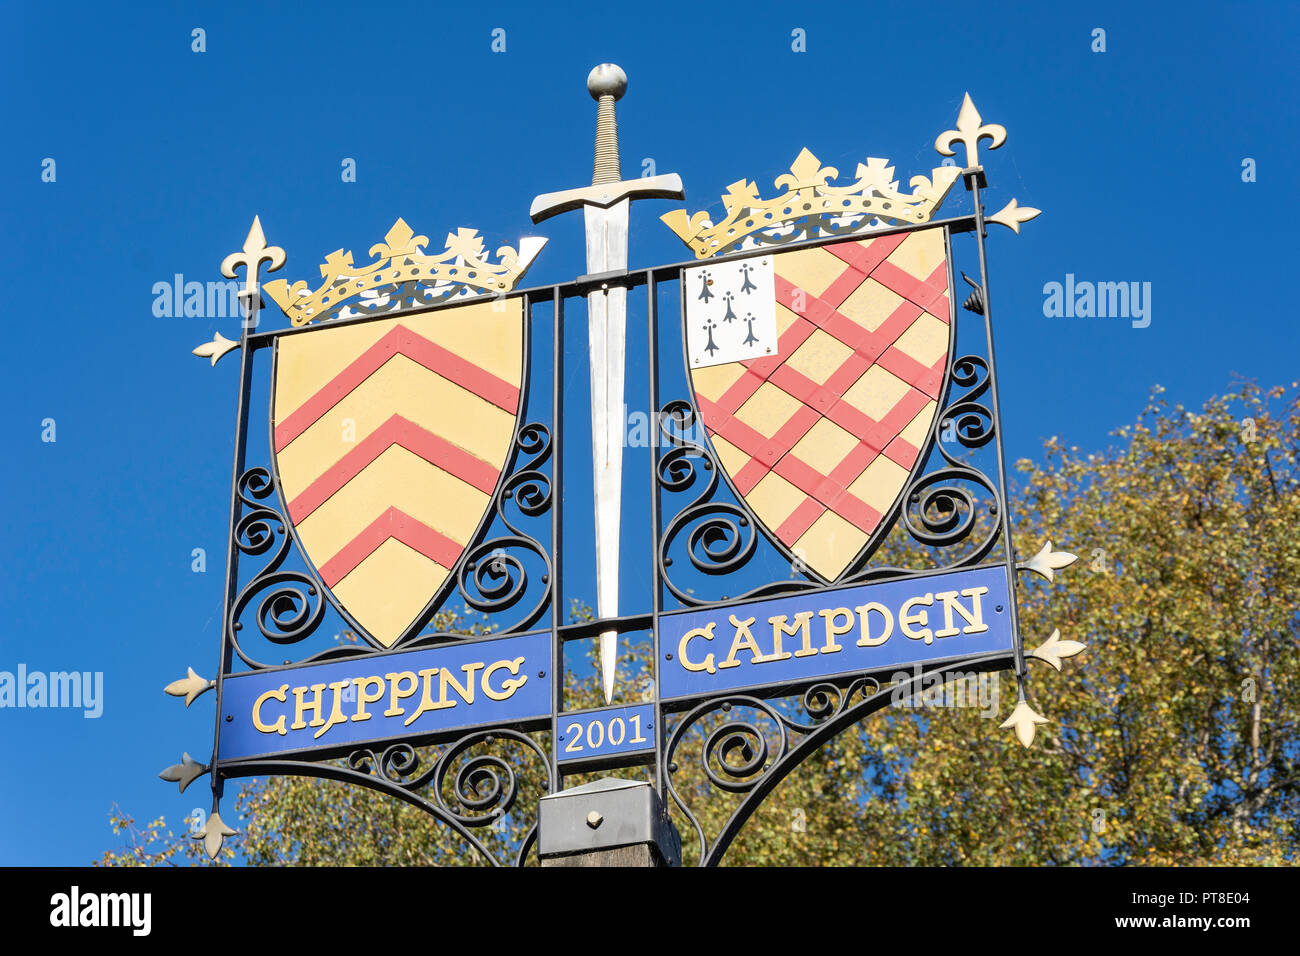 Town sign, High Street, Chipping Campden, Gloucestershire, England, United Kingdom Stock Photo